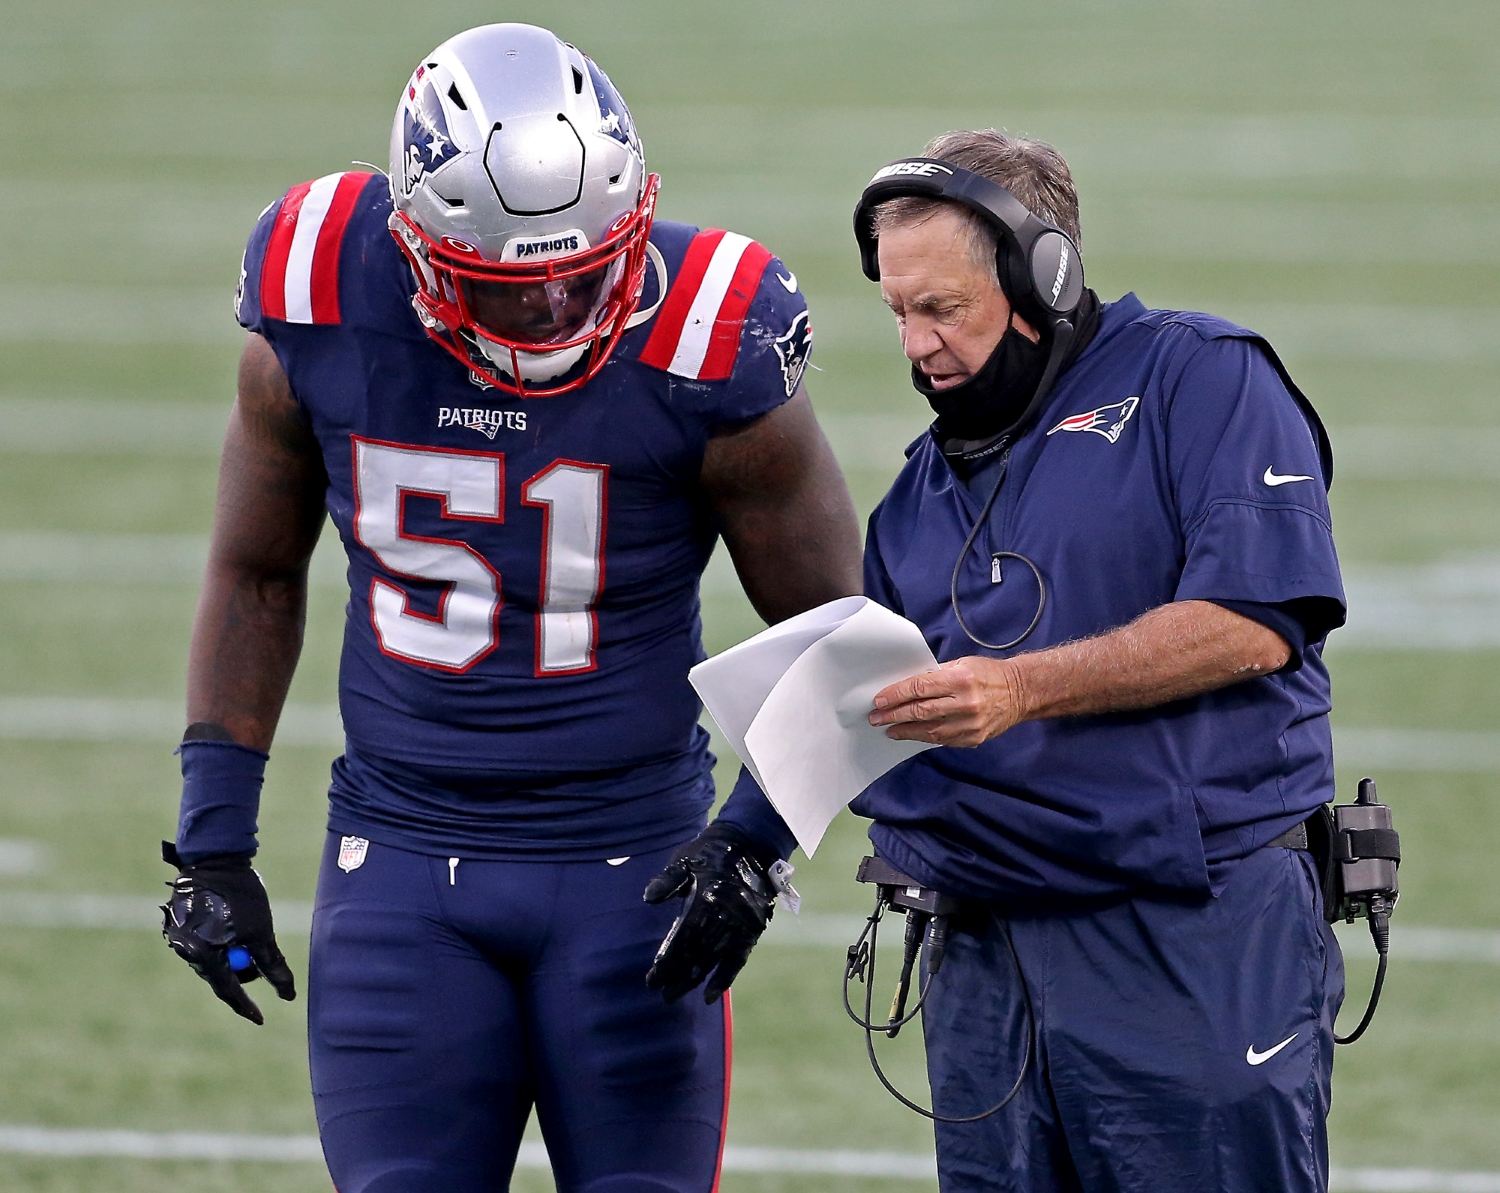 New England Patriots head coach Bill Belichick talks with linebacker Ja'Whaun Bentley during a game against the San Francisco 49ers on Oct. 25, 2020.